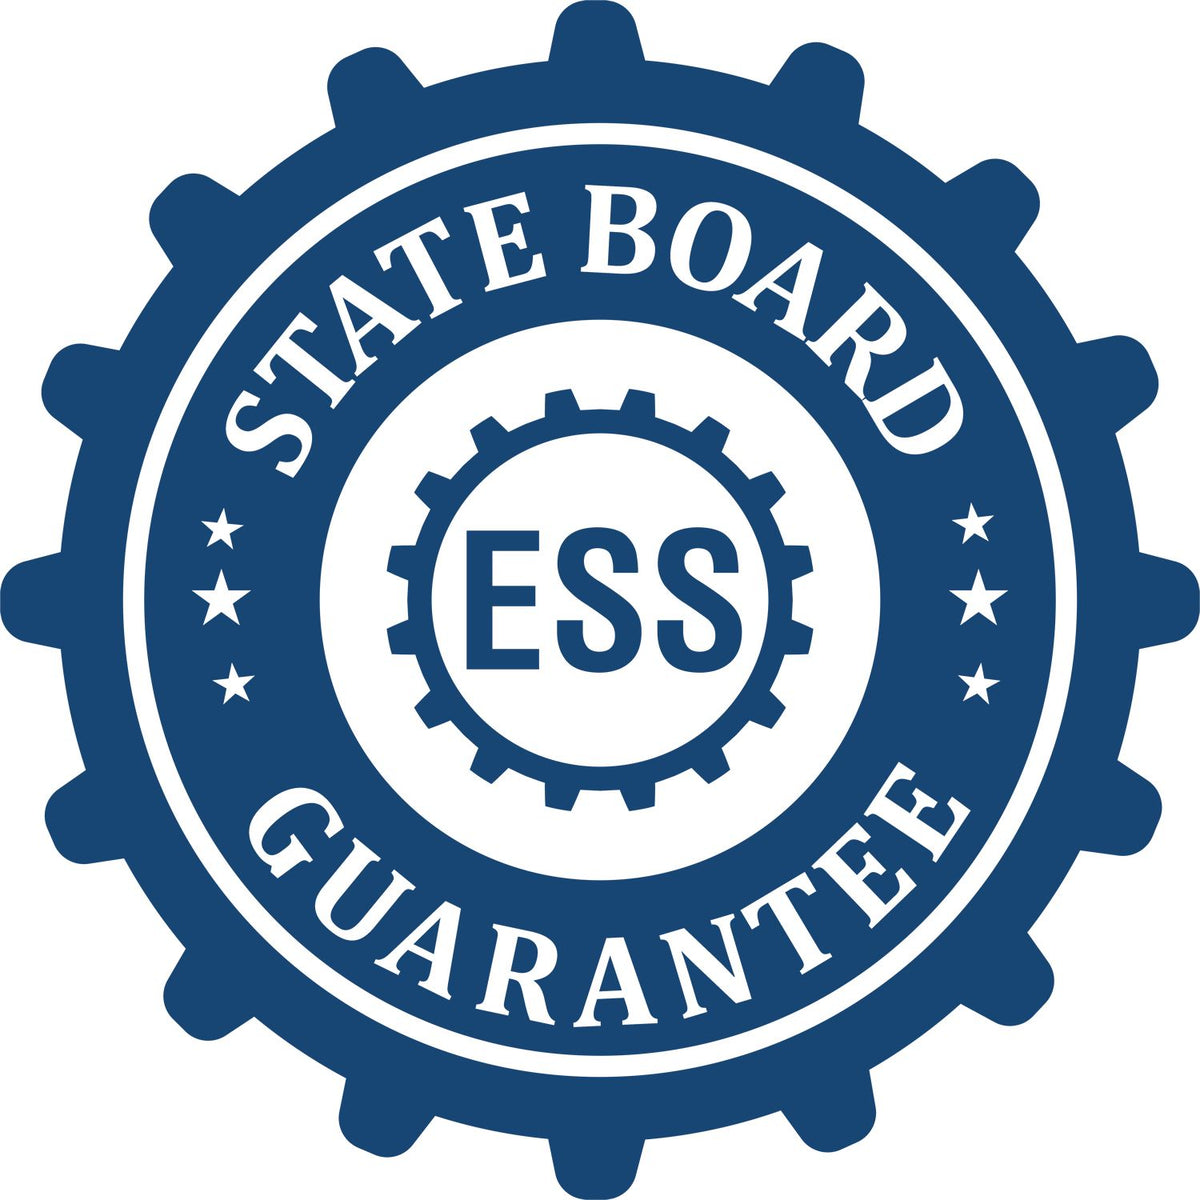 An emblem in a gear shape illustrating a state board guarantee for the Heavy-Duty Maine Rectangular Notary Stamp product.